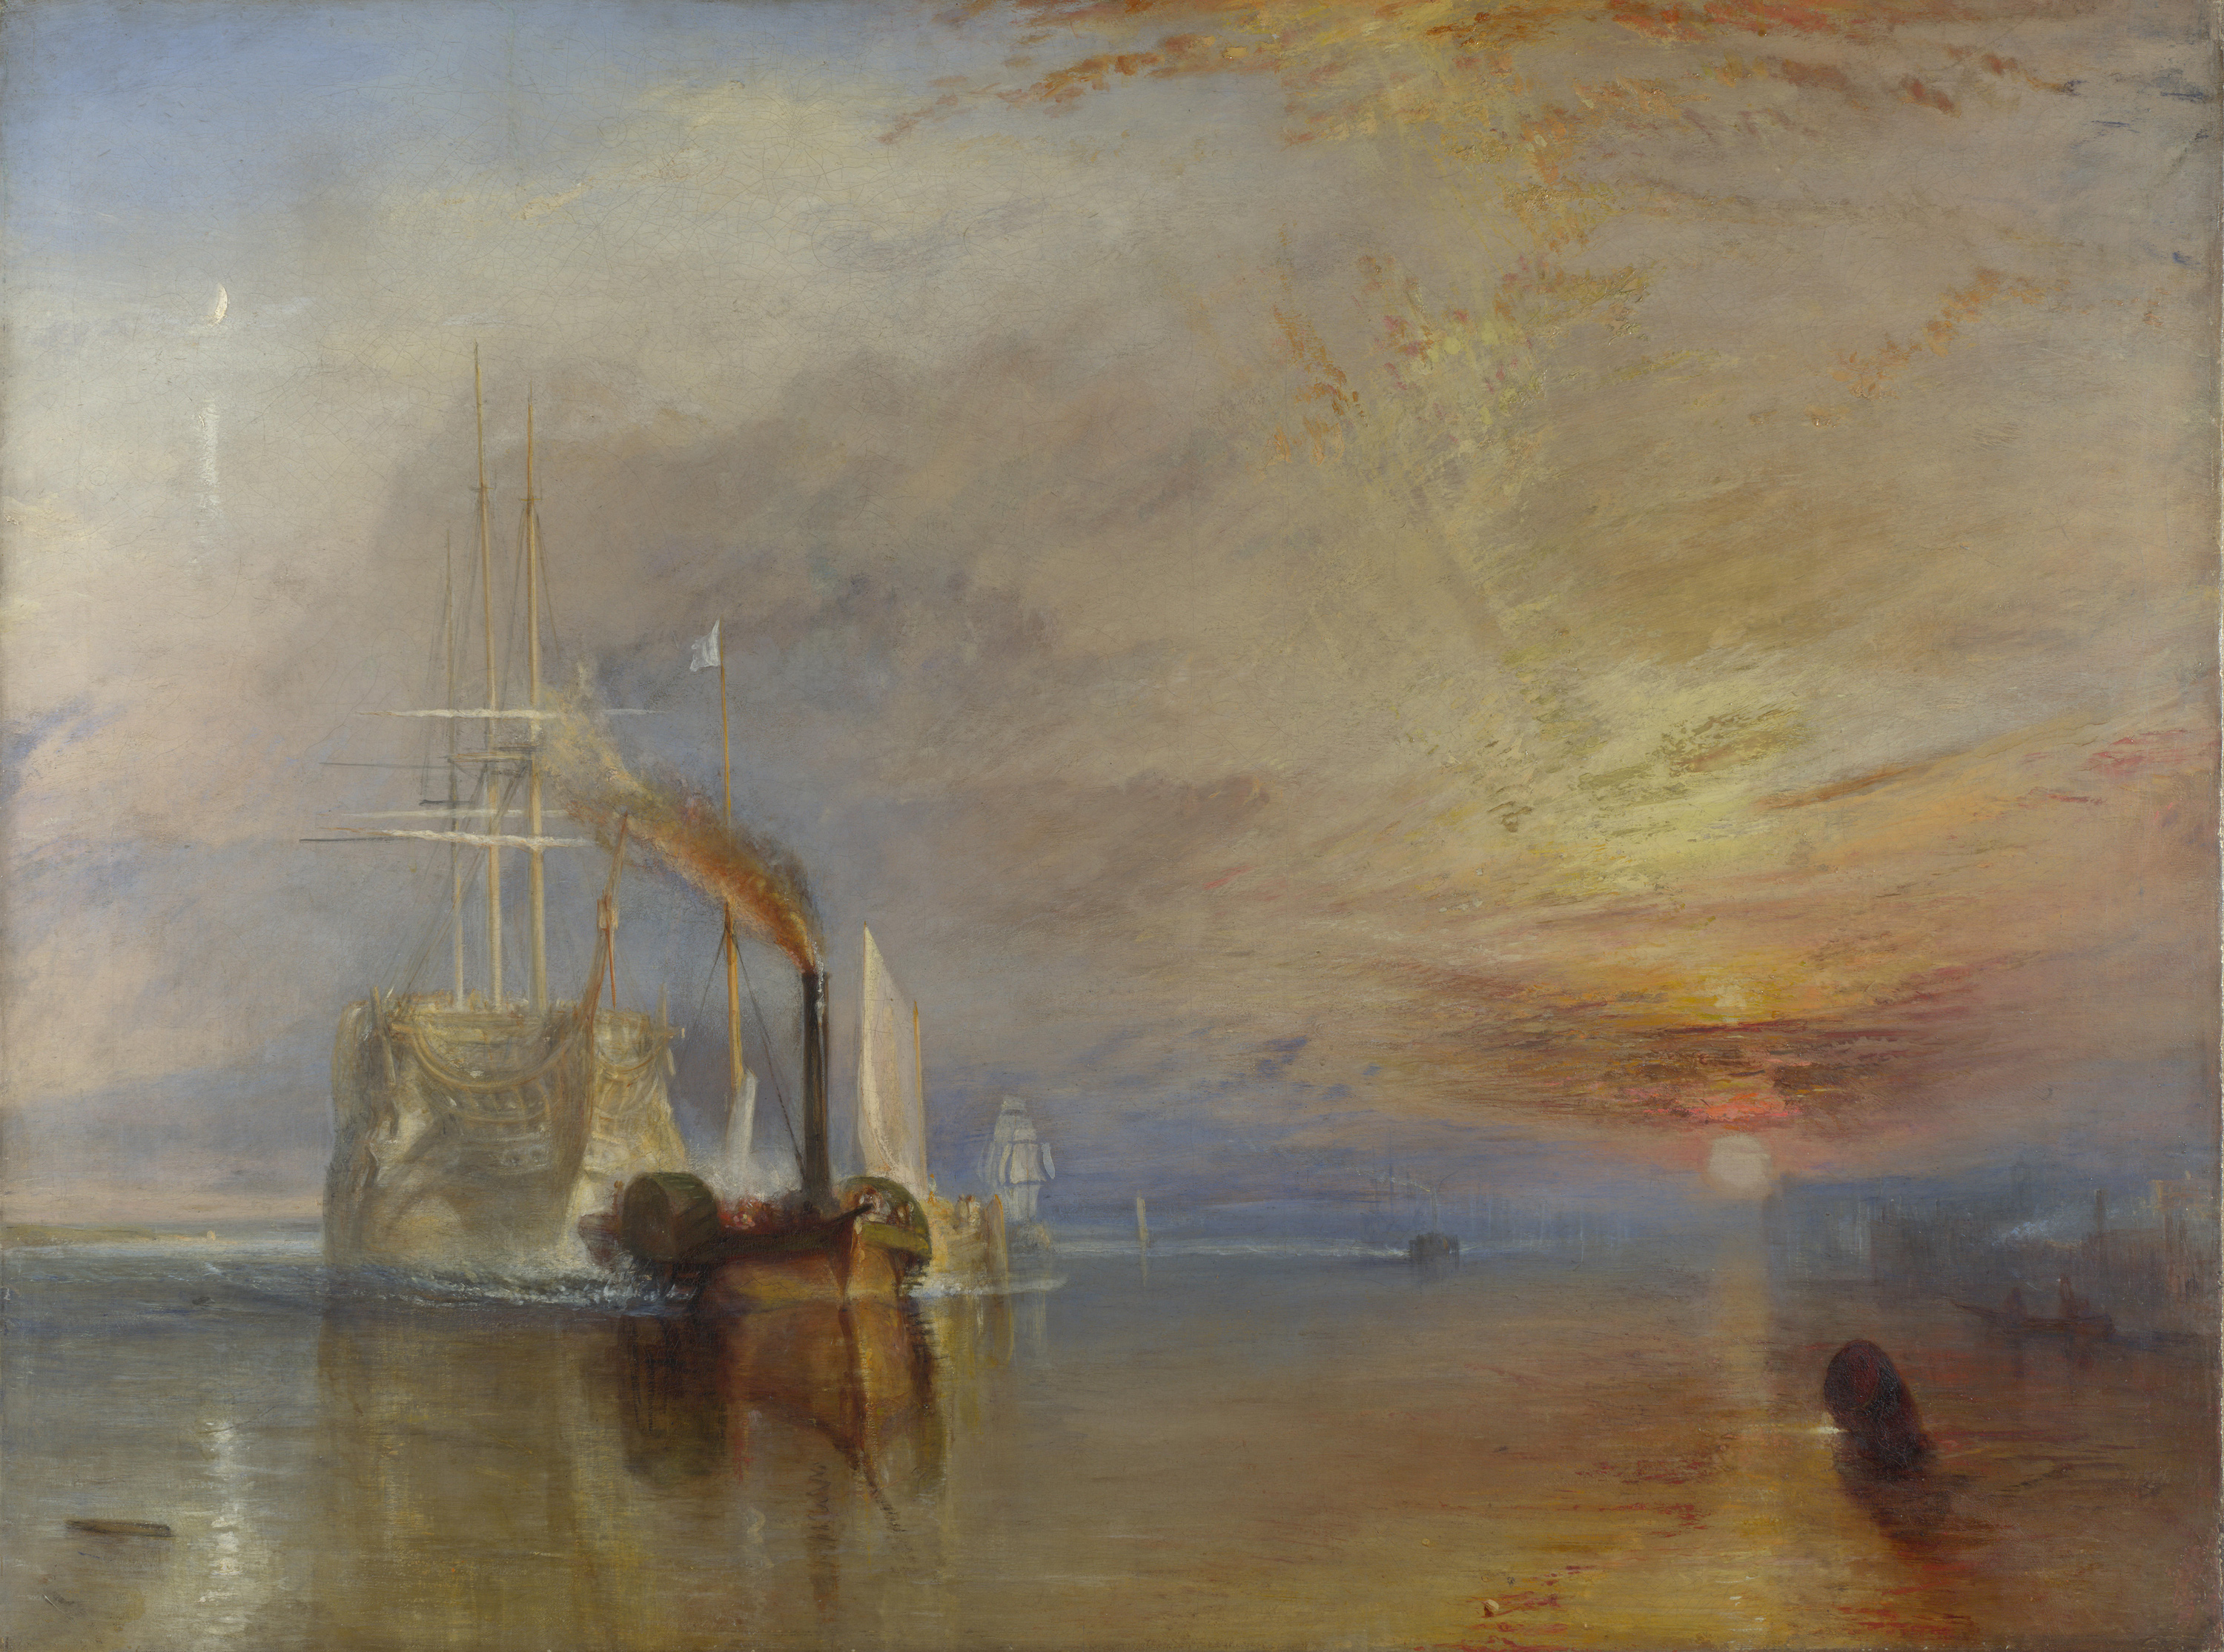 The Fighting Temeraire by Joseph Mallord William Turner - 1839 - 90.7 × 121.6 cm National Gallery